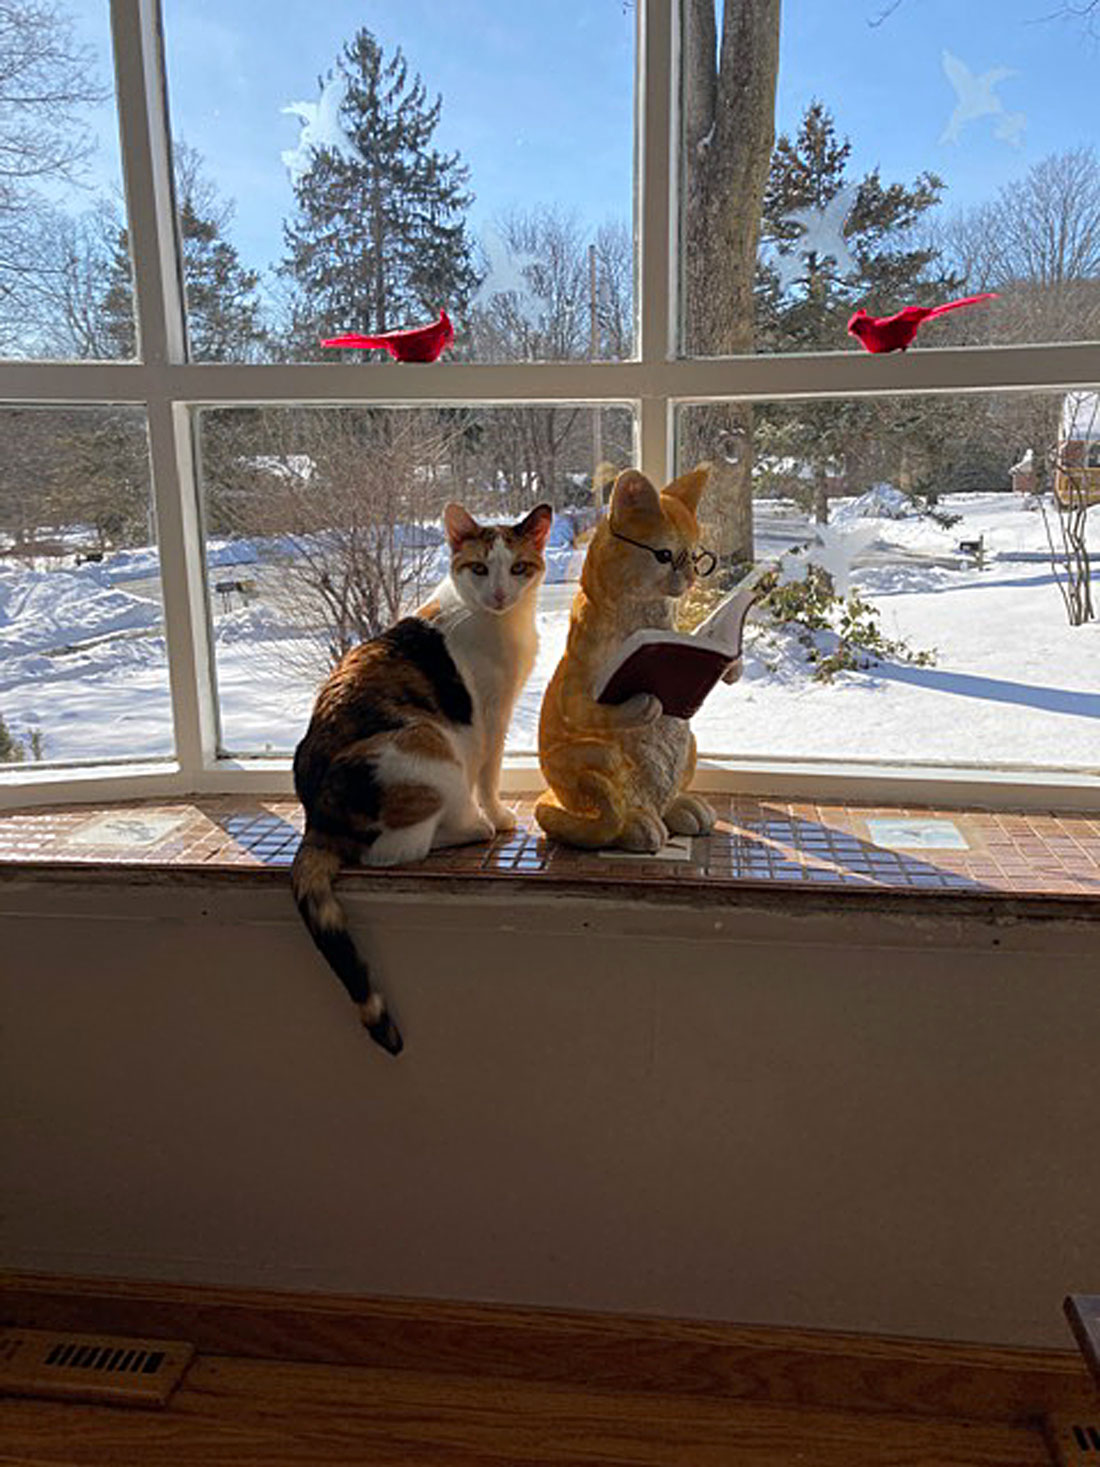 This is our rescue, Molly, who has been a wonderful addition to our family! She is three years old and has taken a liking to reading in the window with her “friend”, a wonderful ceramic cat statue! – Heloise.